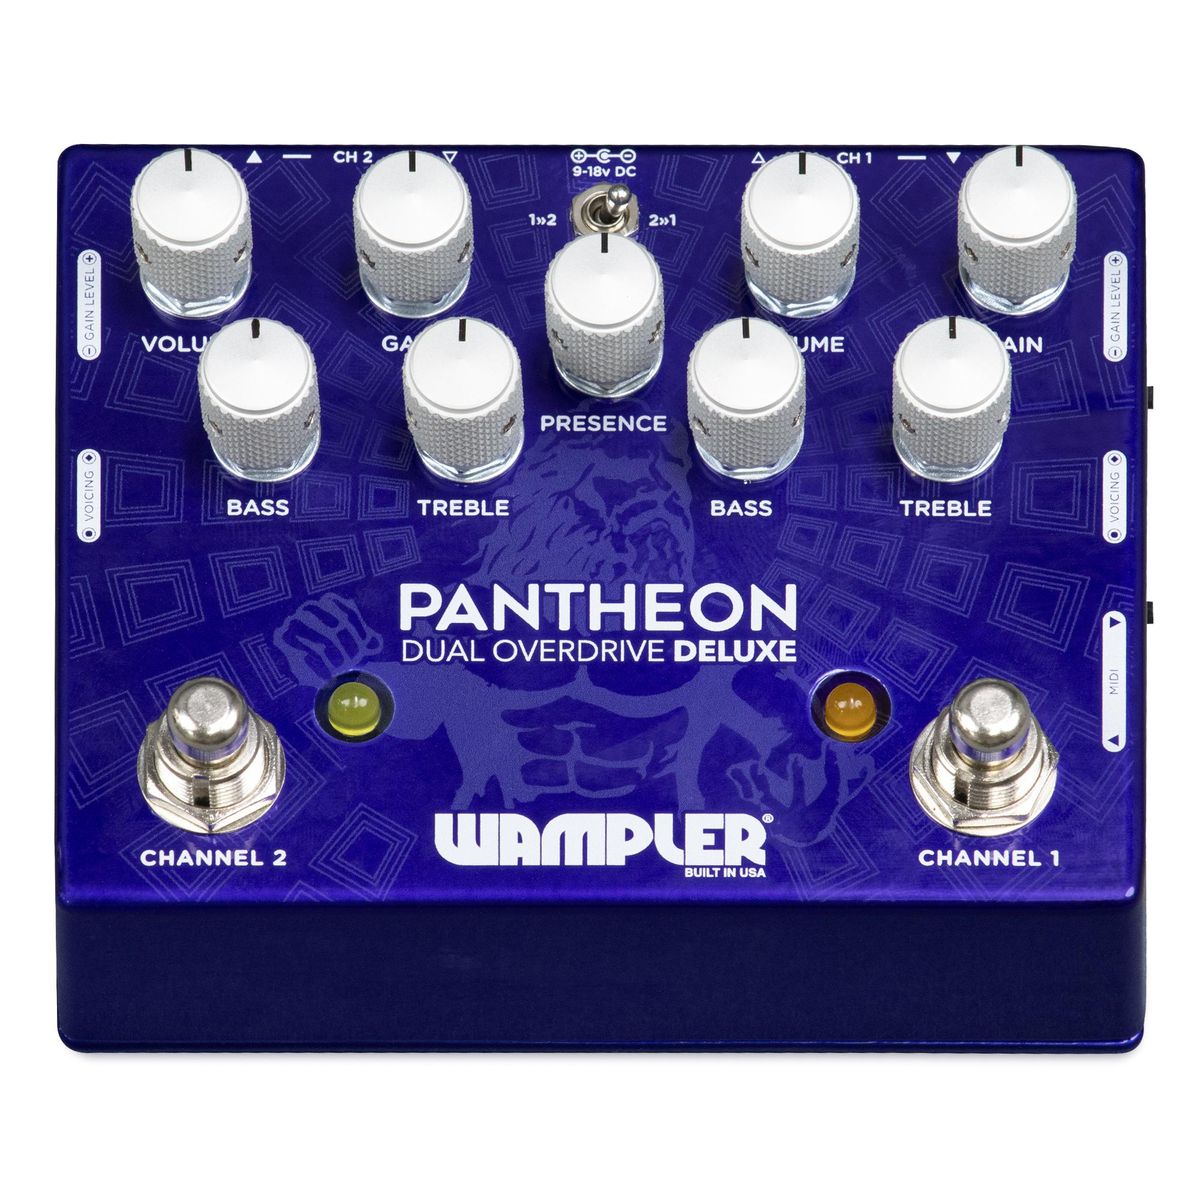 Wampler Pedals Unveils the Pantheon Dual Overdrive Deluxe